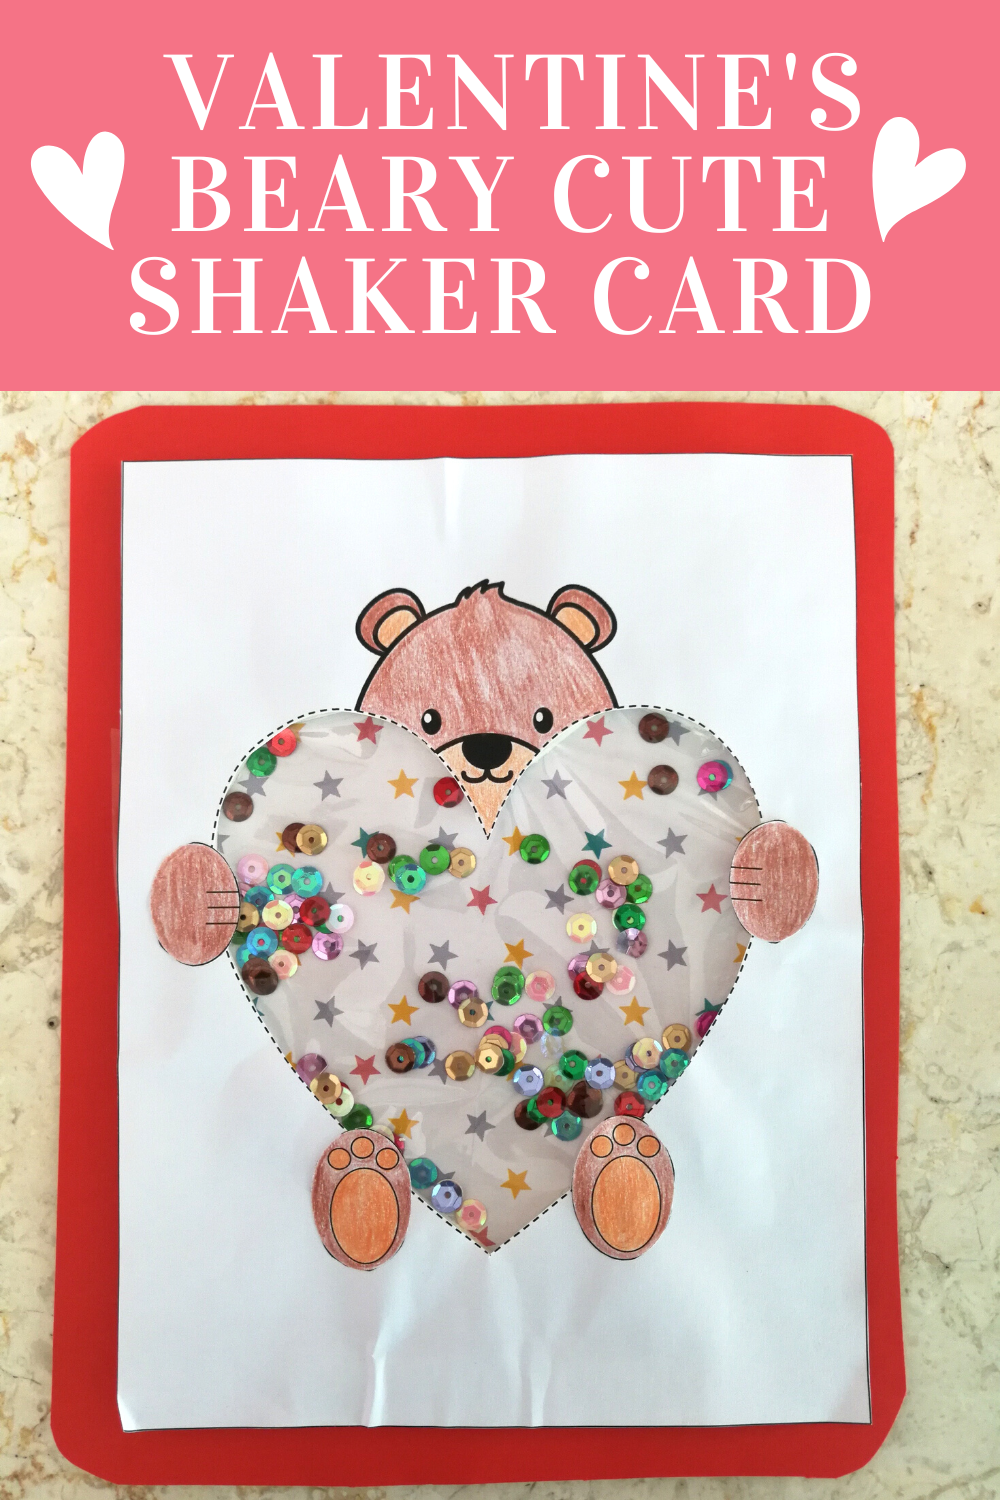 Valentines Shaker Card Template